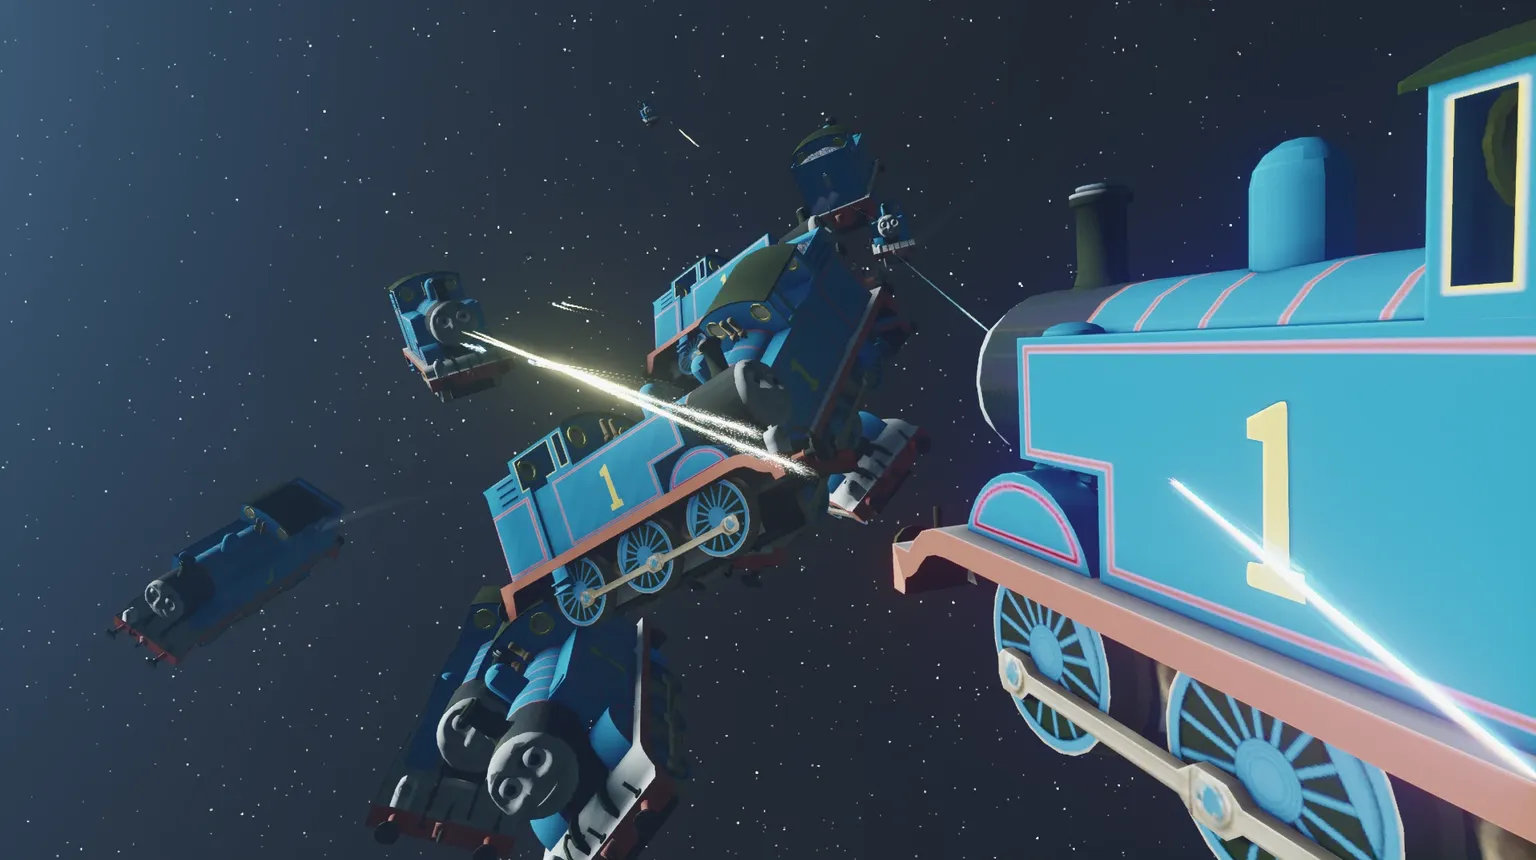 3D rendered game screenshot from Starfield, showing many Thomas the Tank Engines battling each other with lasers in space.